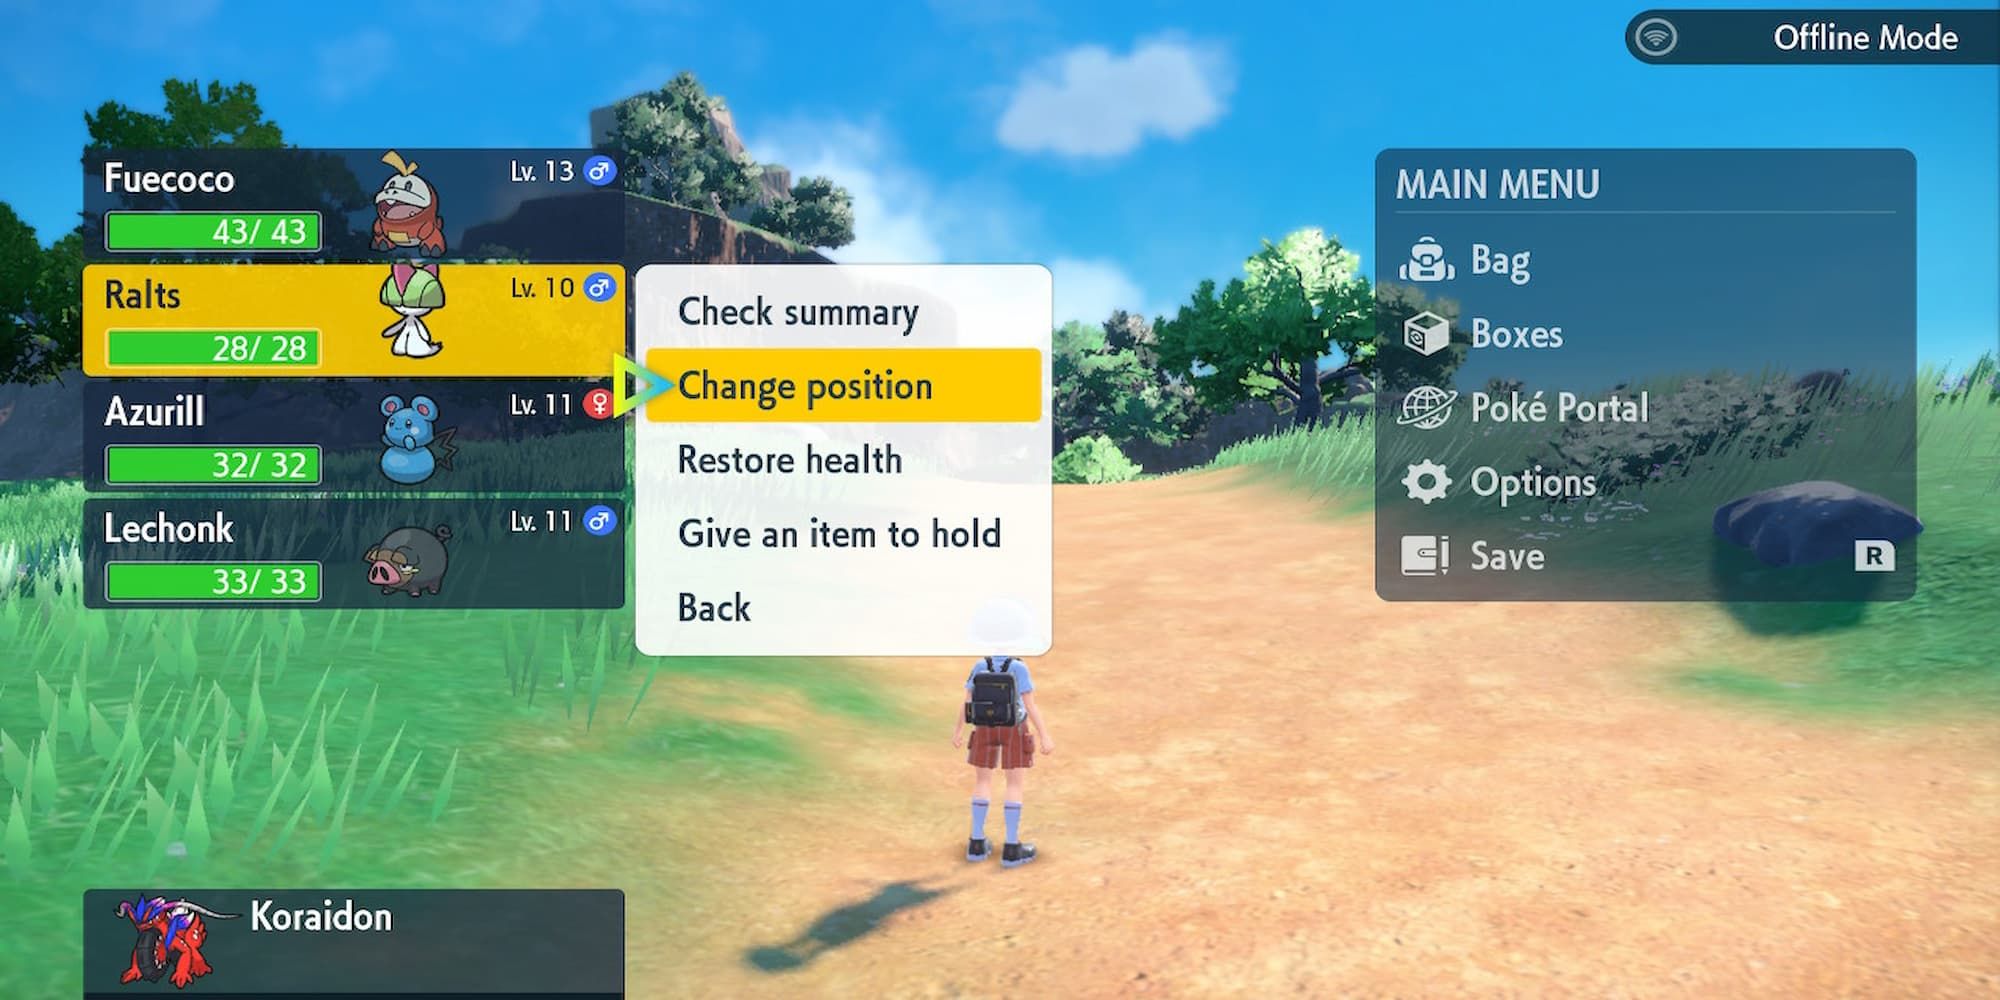 Player Switching Out Their Pokémon In The Menu